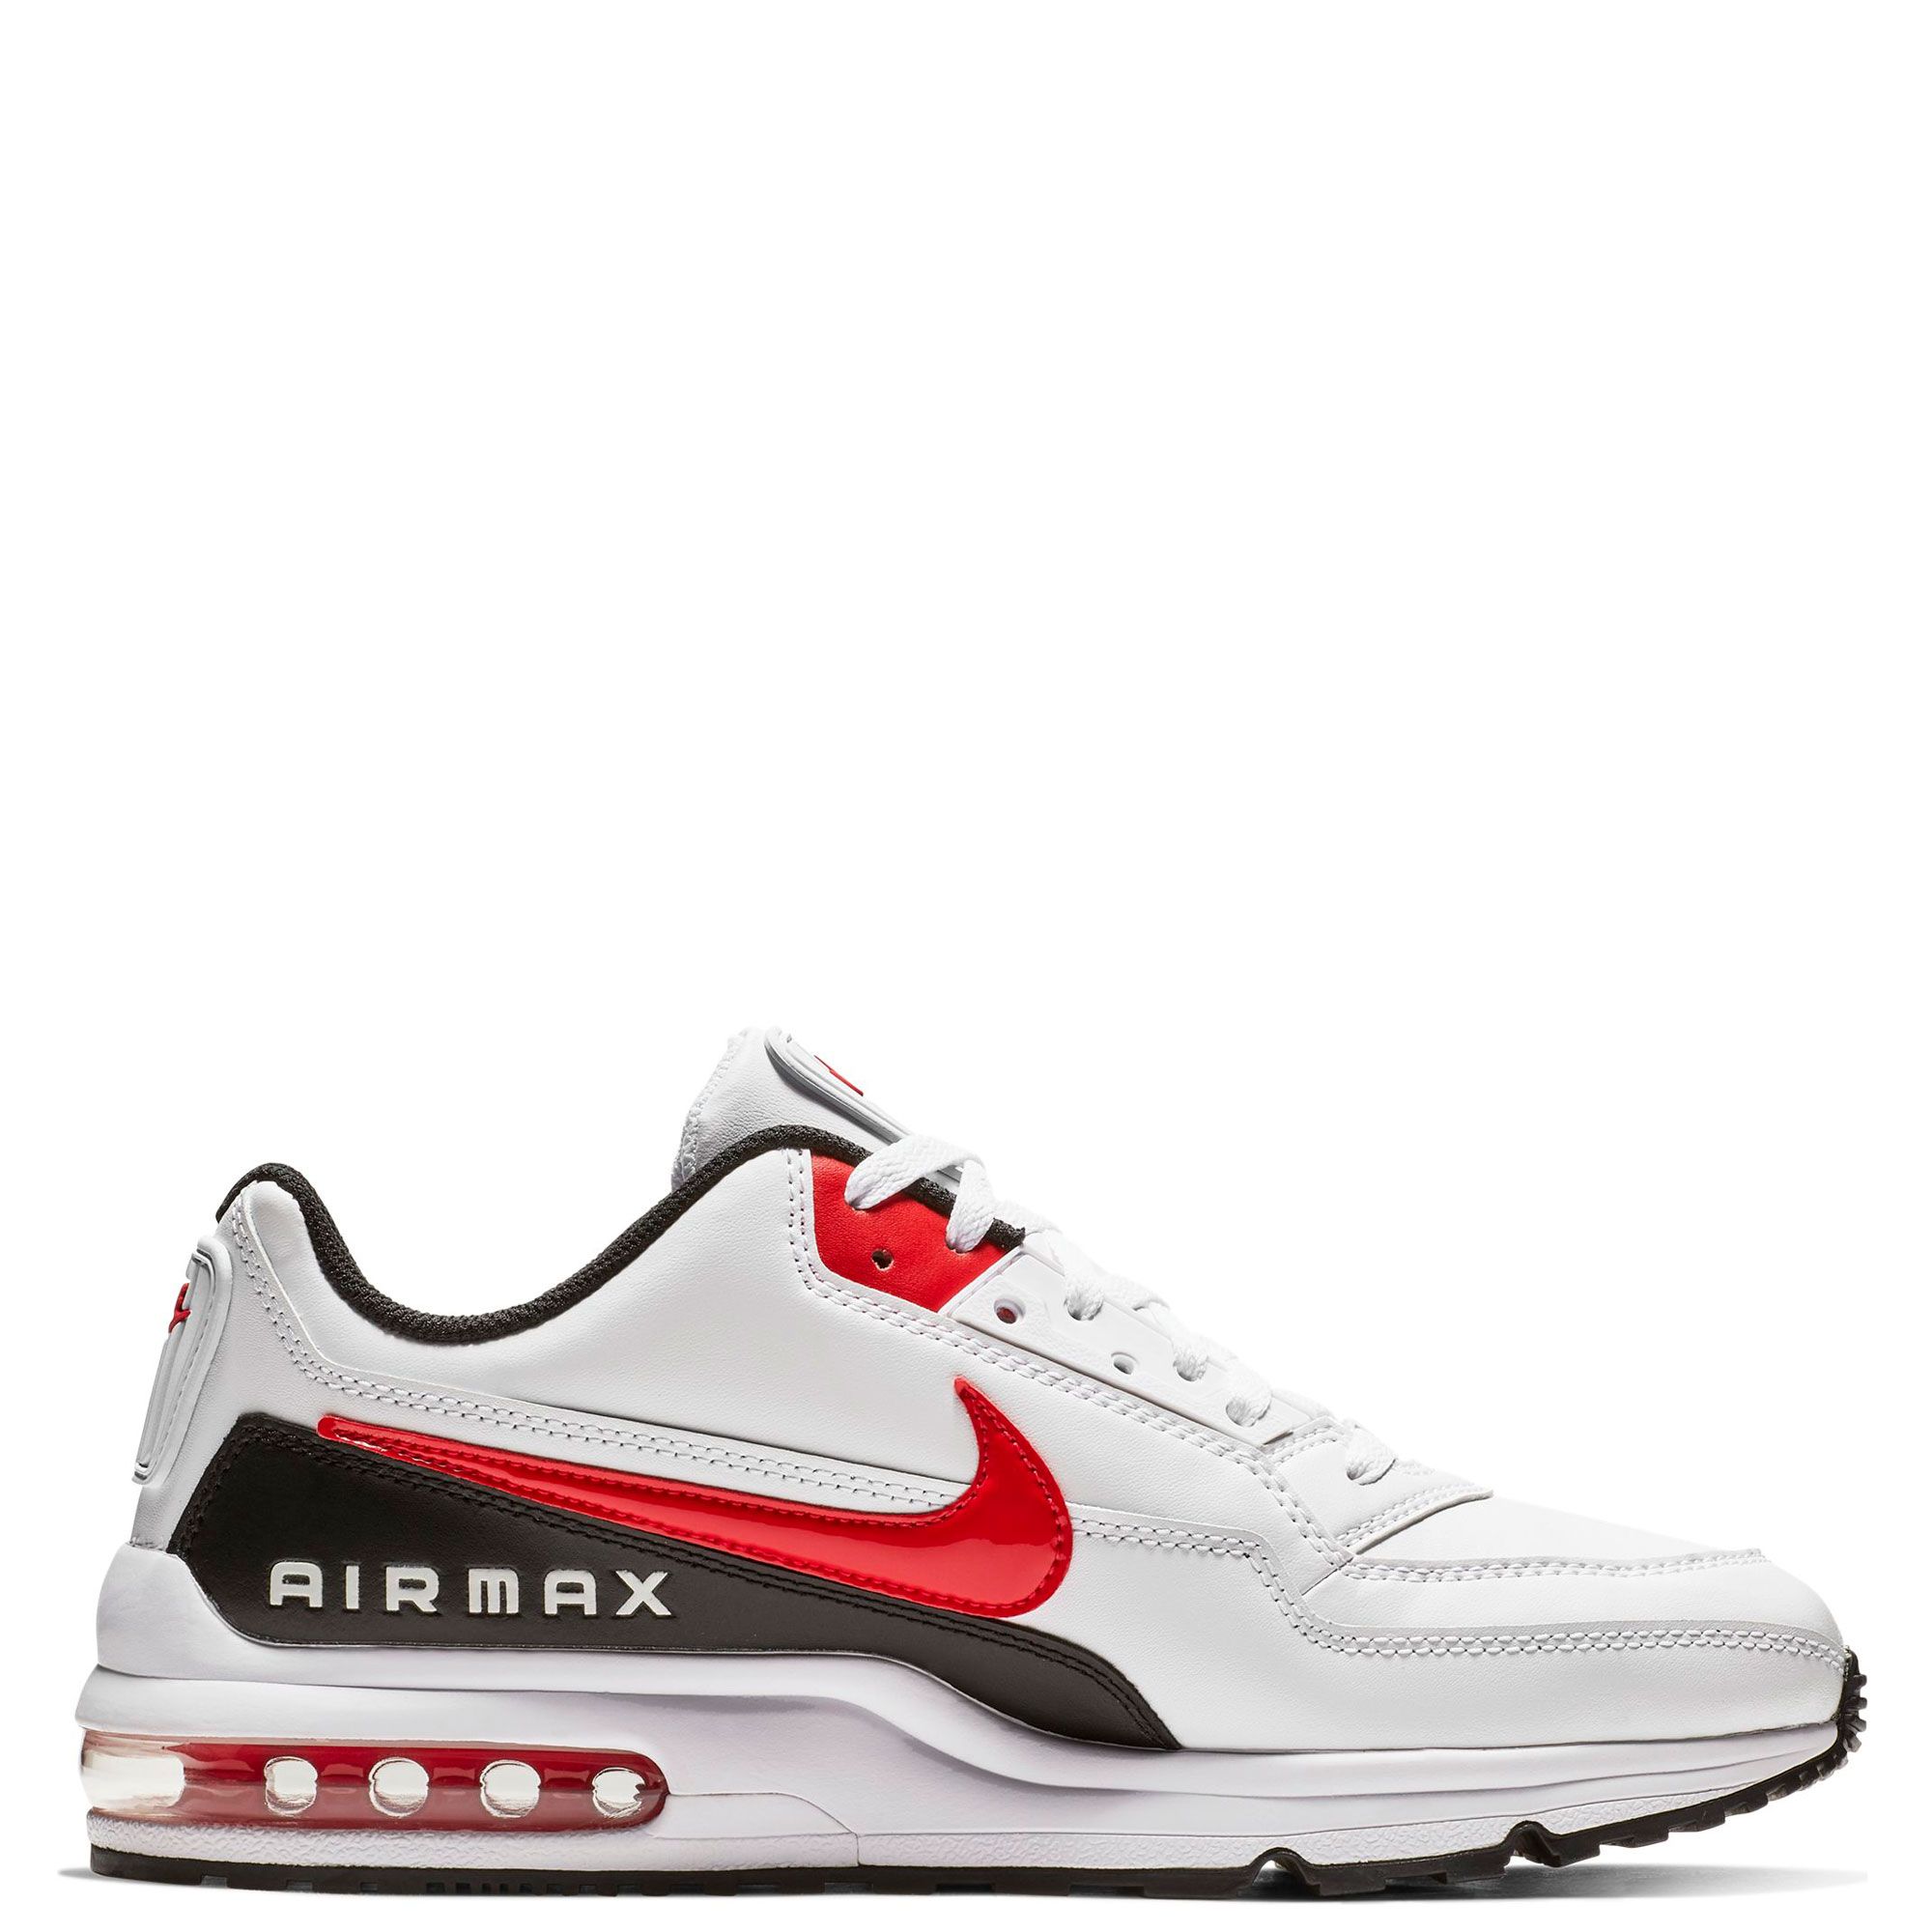 Nike Air Max 3 Sneakers in White, Red and Black